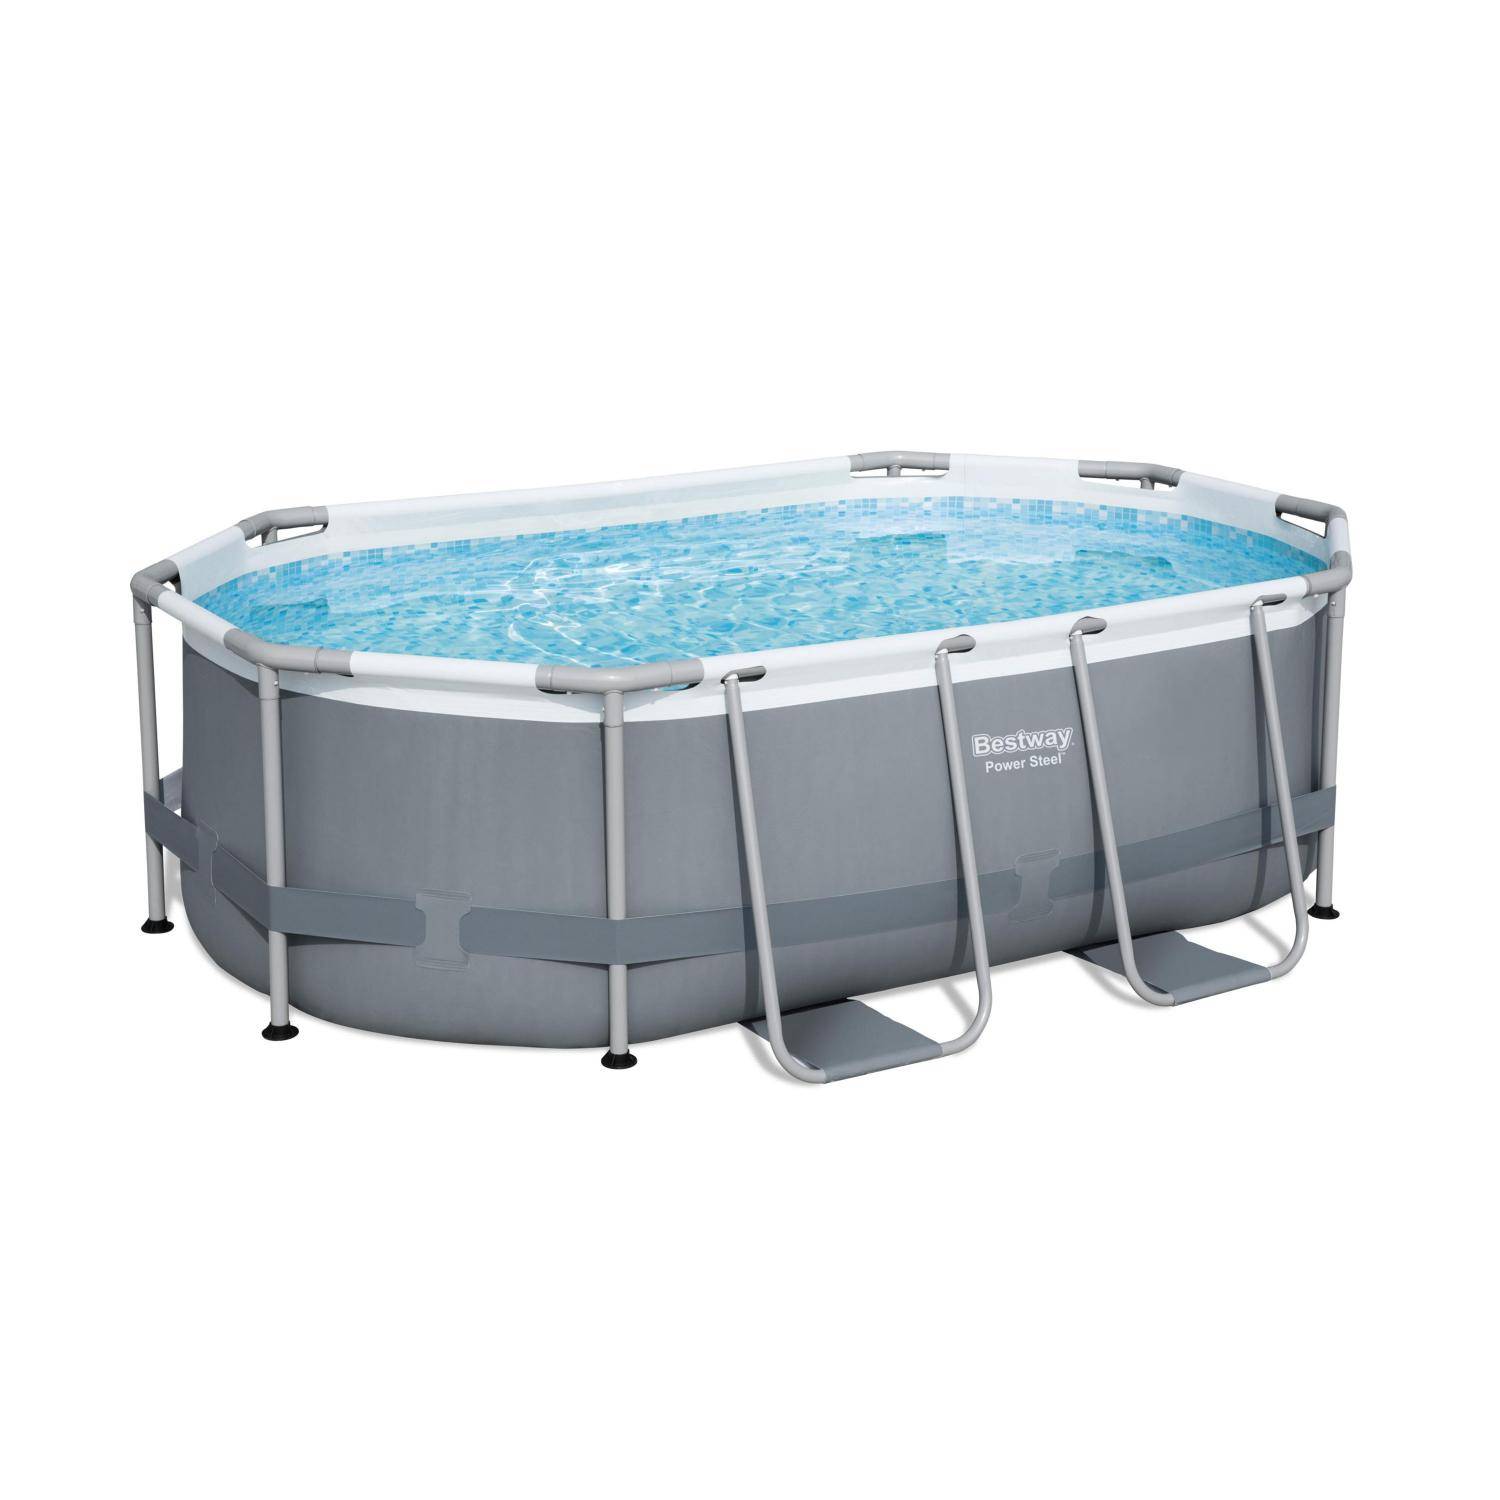 3x2m above ground tubular swimming pool, grey, rectangular, with pump, filter cartridge, diffuser - Bestway Spinelle - Grey Photo2